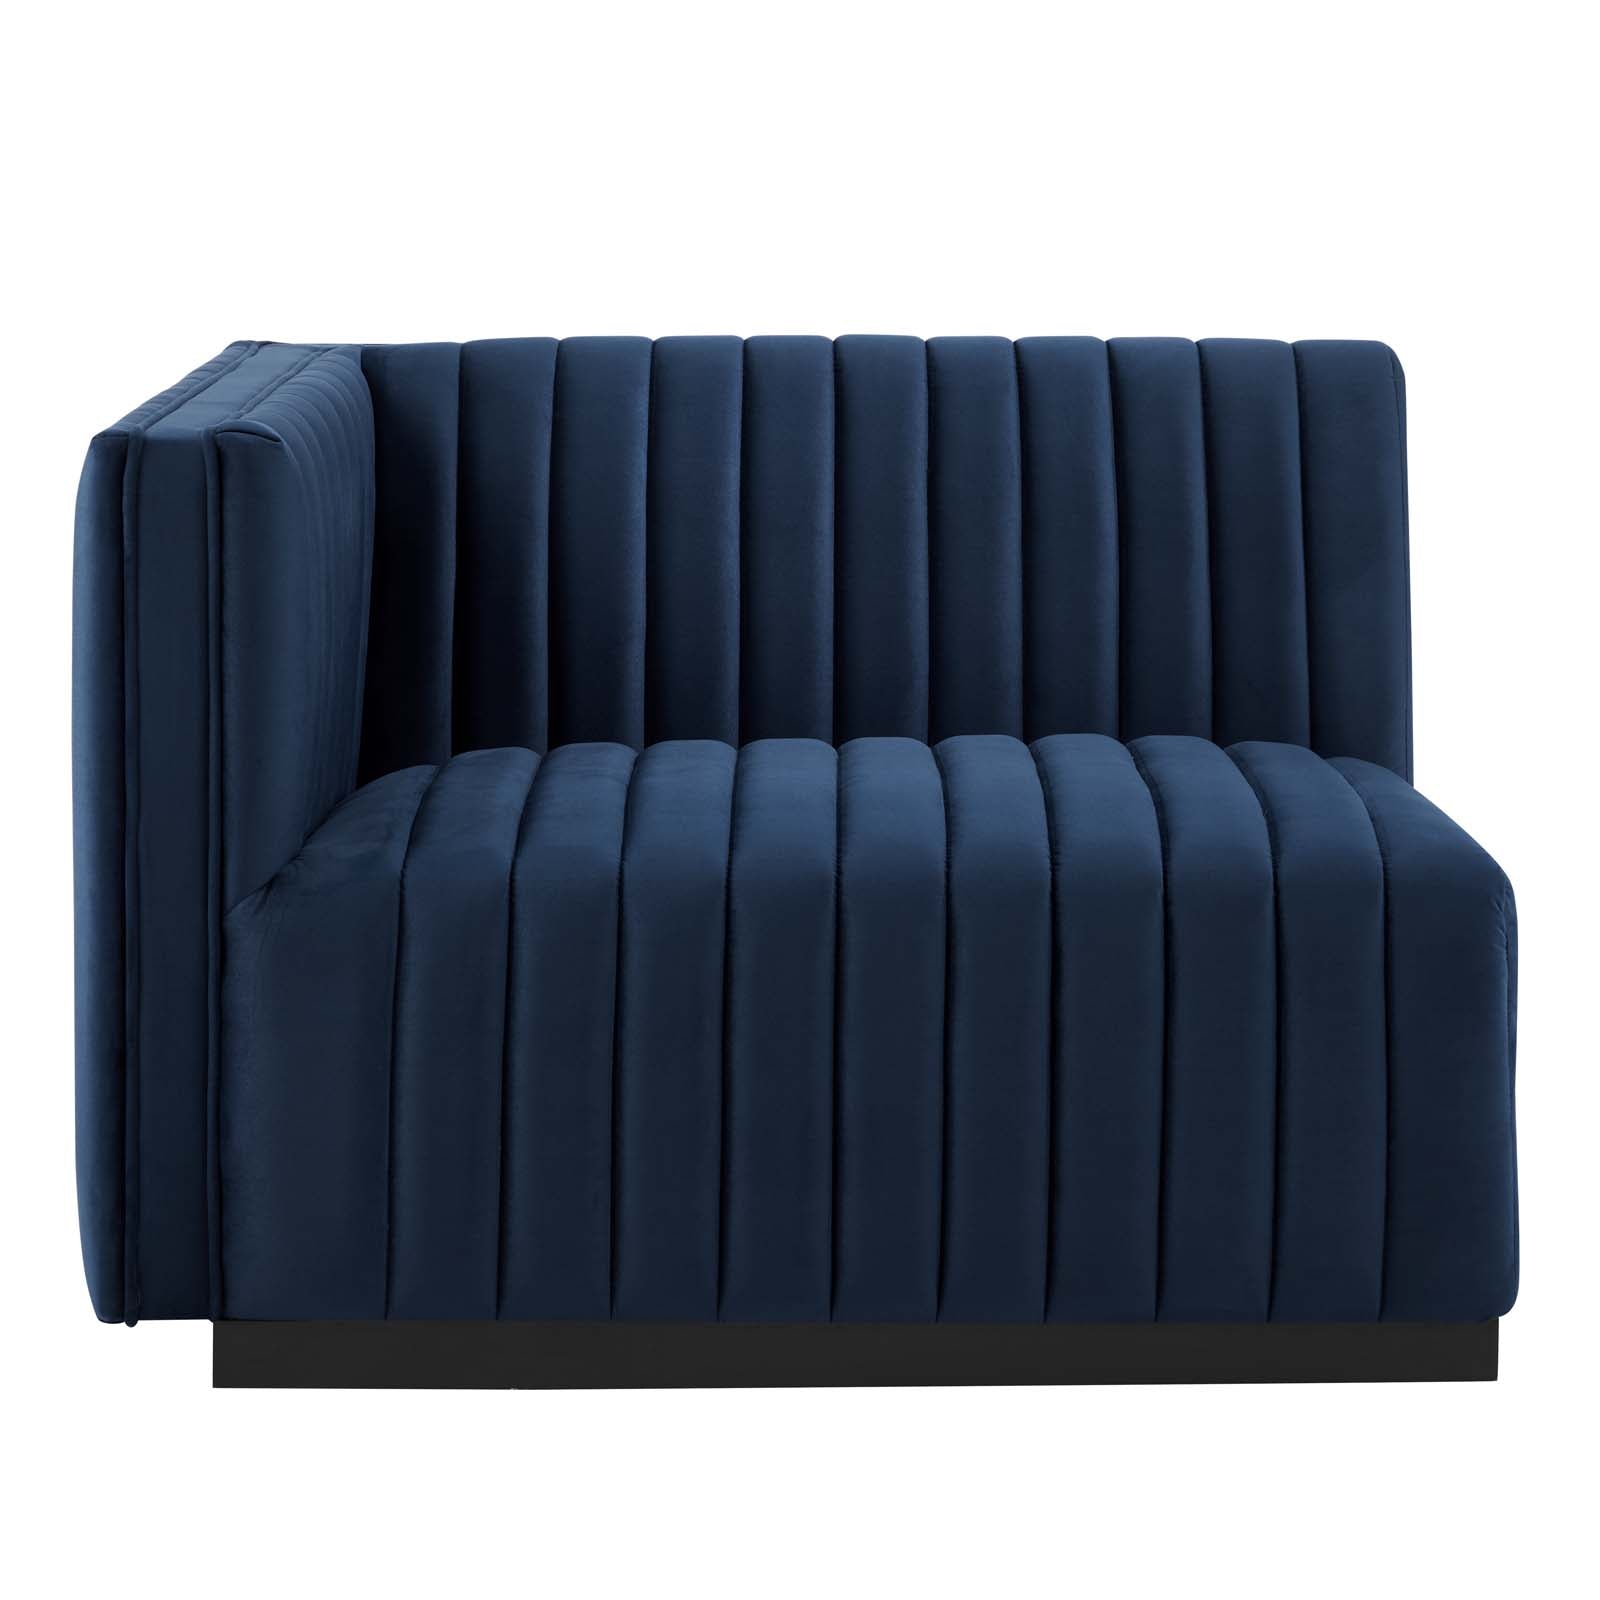 Modway Sectional Sofas - Conjure Channel Tufted Performance Velvet 5-Piece Sectional Black Midnight Blue